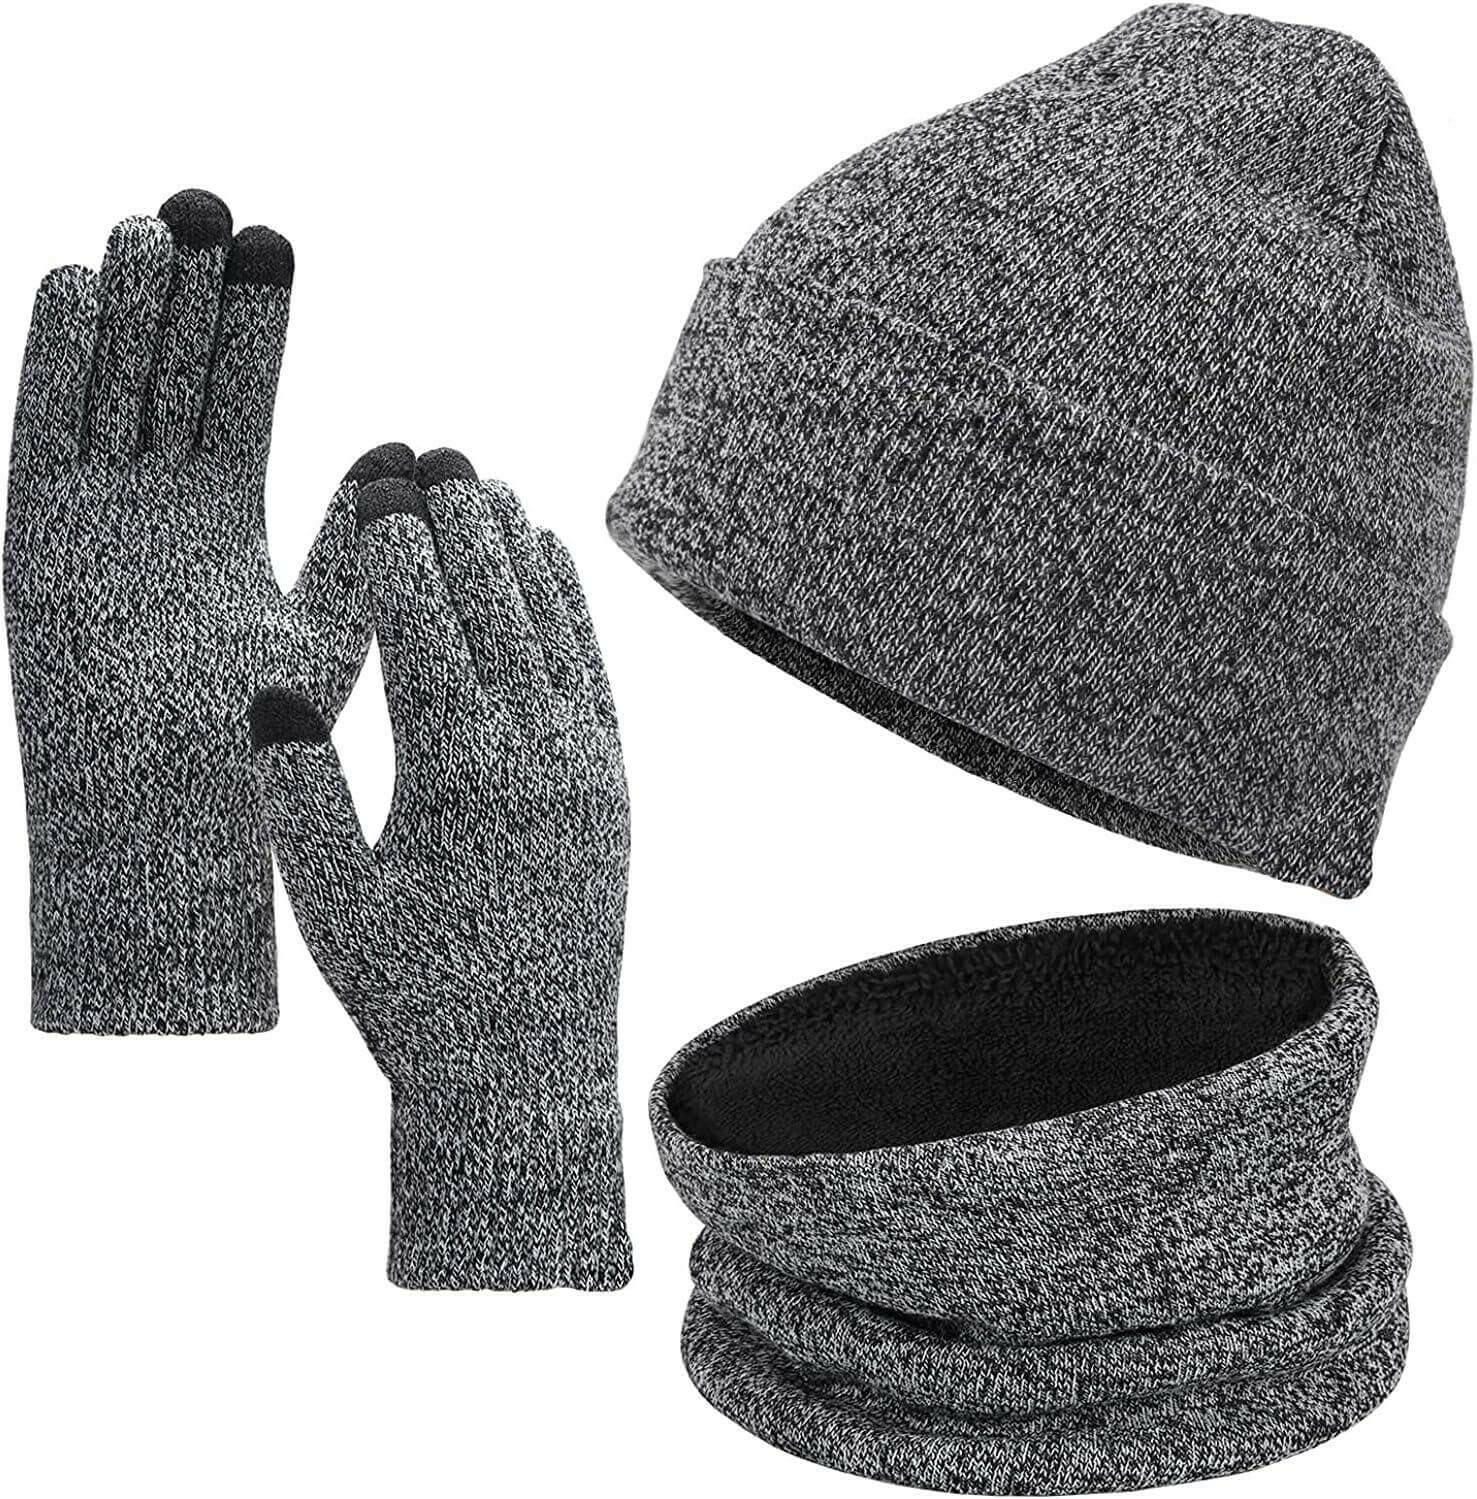 Winter Beanie Hat Scarf Touchscreen Gloves Set, Knit Thick Fleece Lined Warm Touchscreen Gloves Beanie Scarf Set for Men and Women.